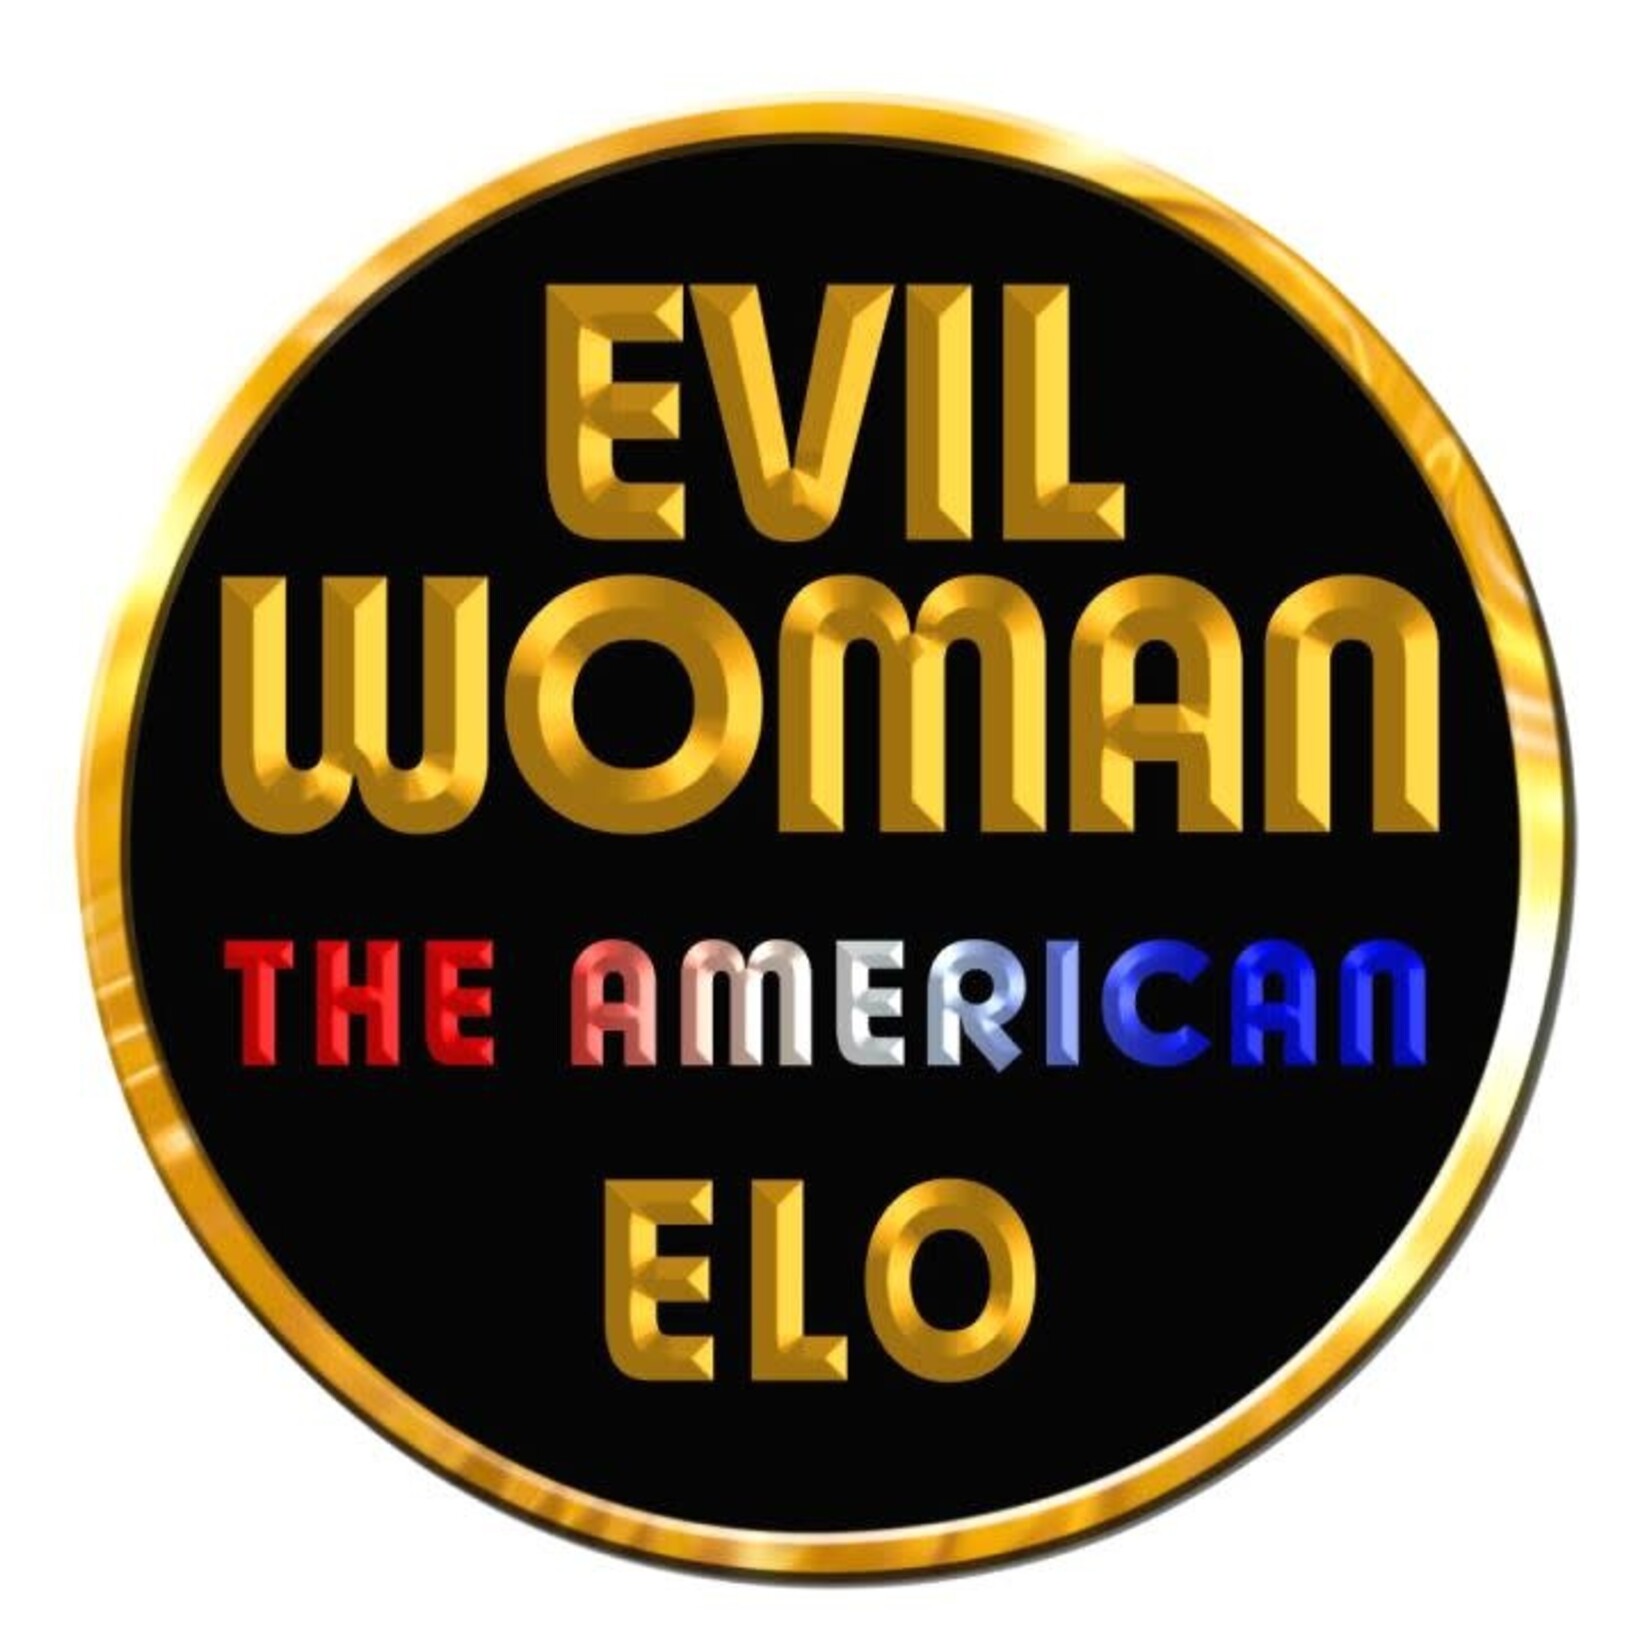 Egyptian Theatre -Dekalb Egyptian Theatre-Dekalb $27 Admission "Evil Woman: The American ELO" 10/14